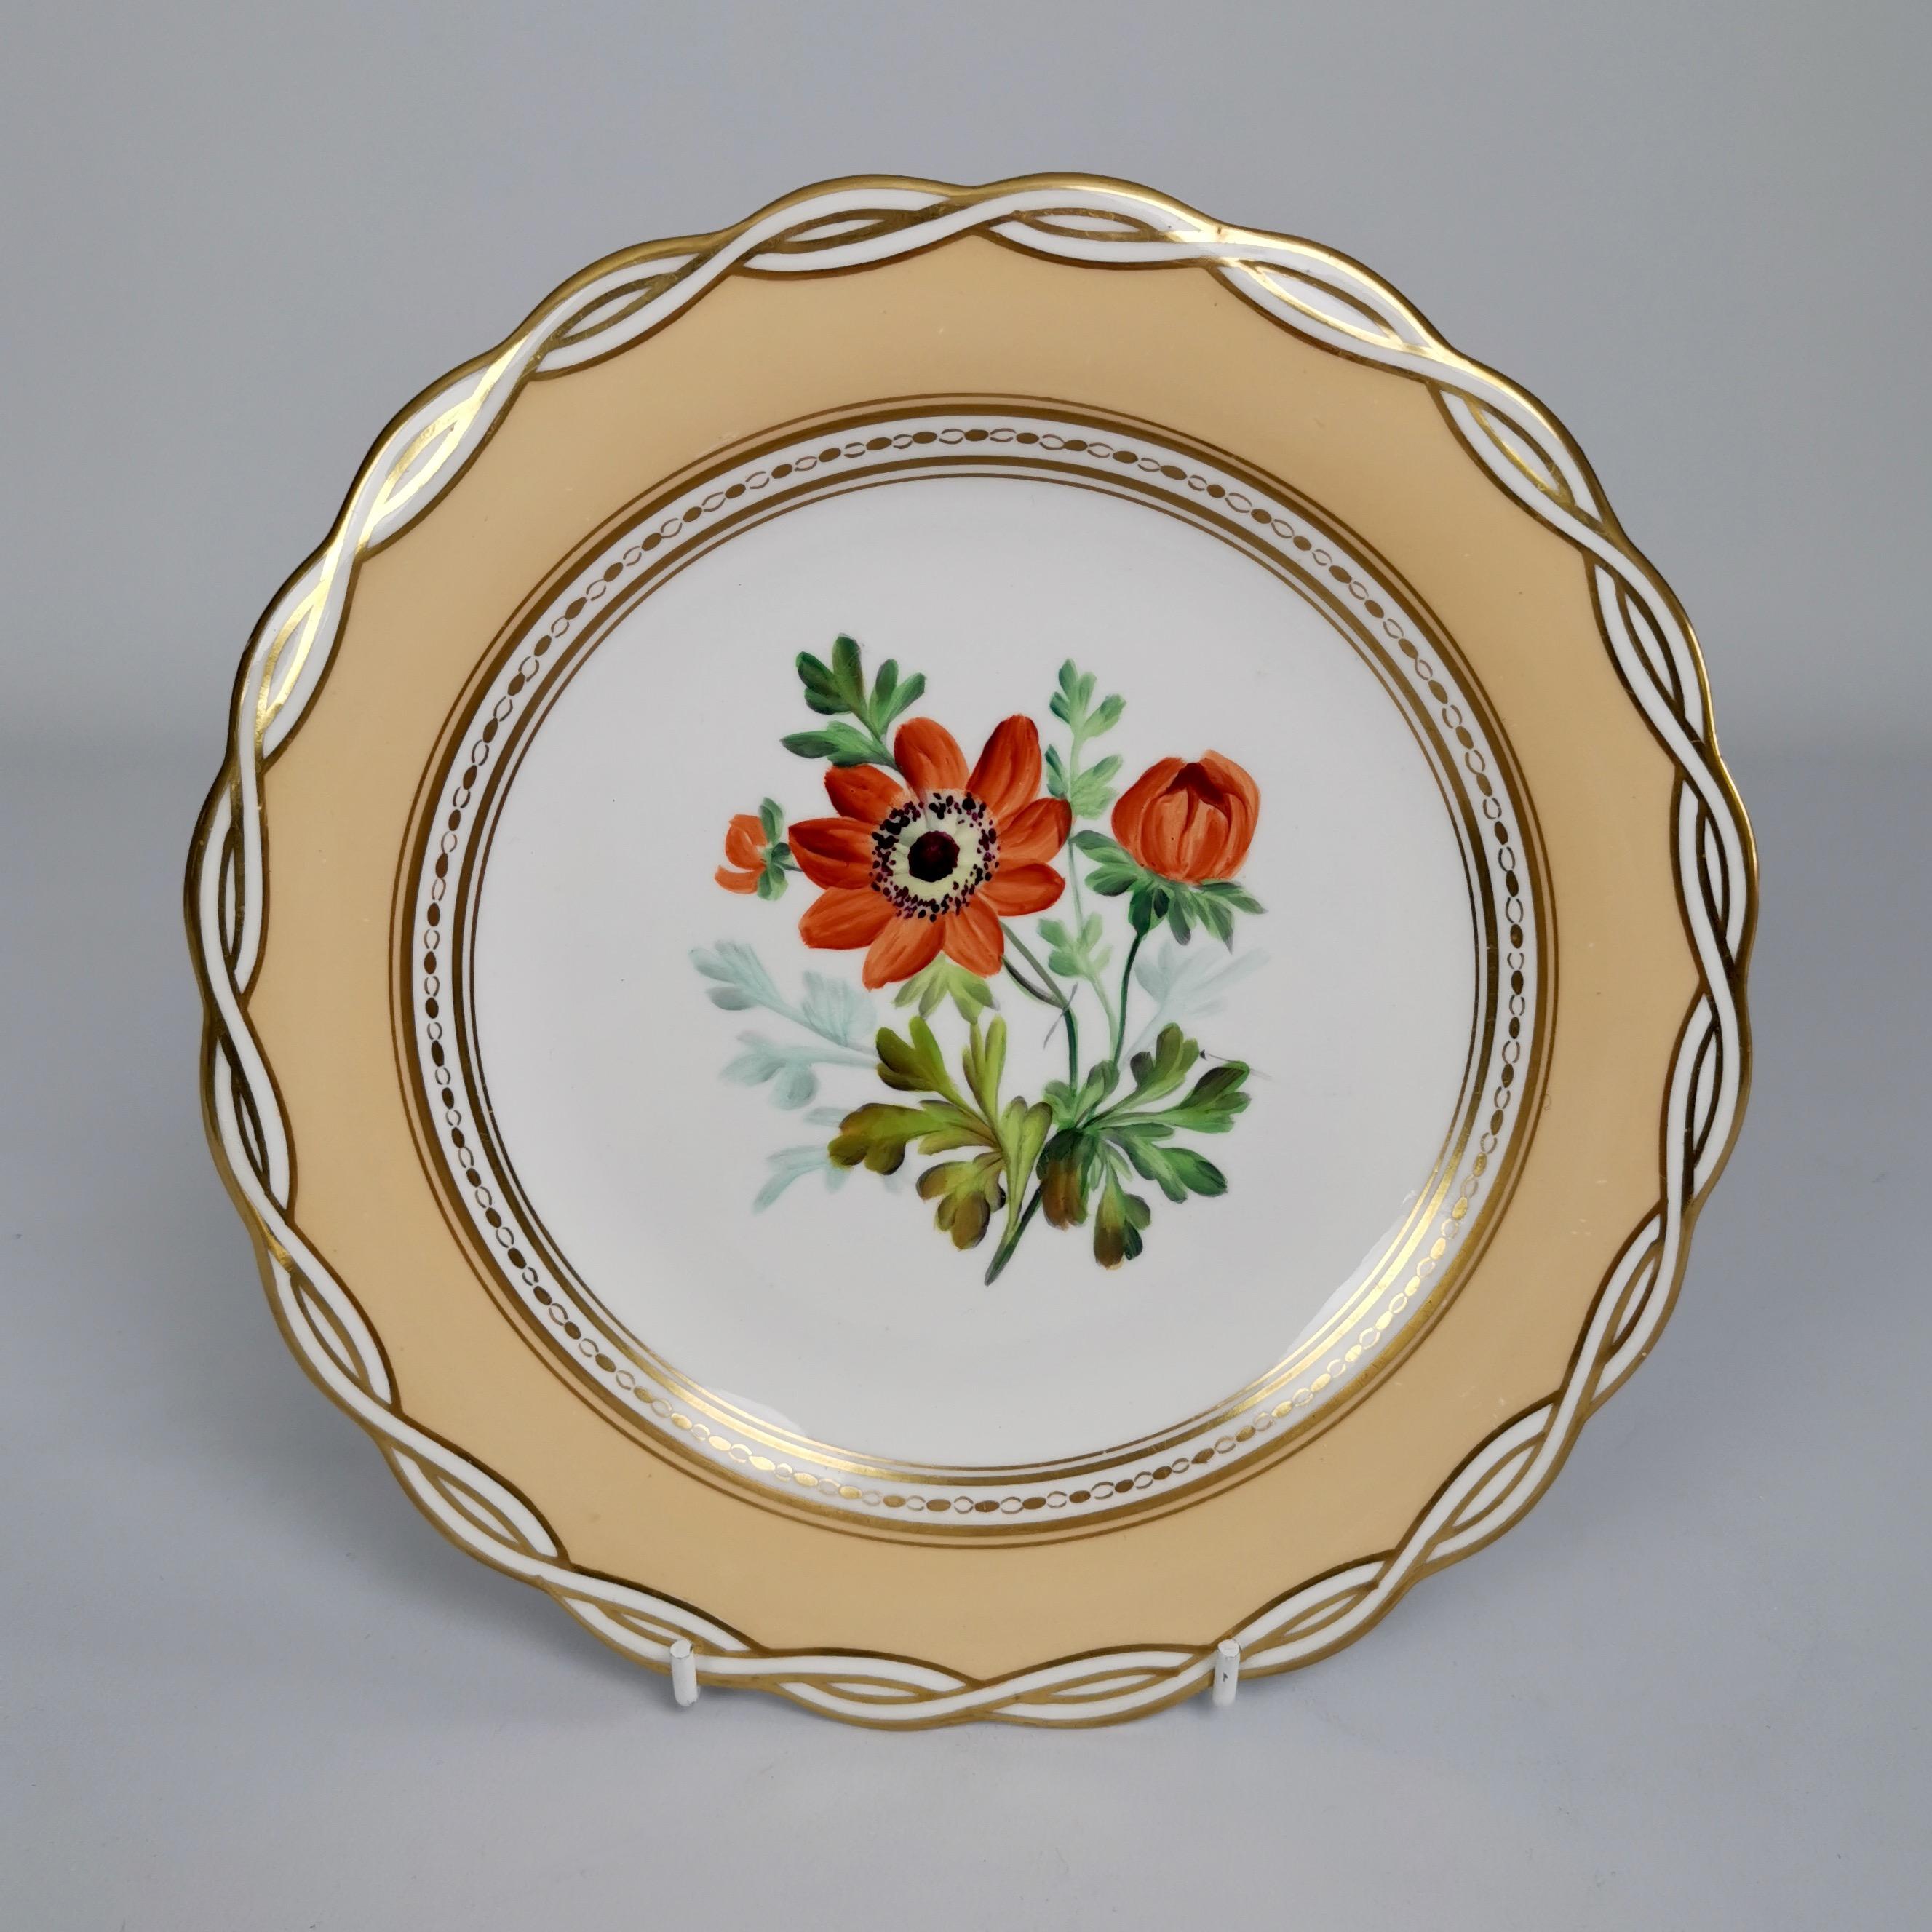 This is a beautiful pair of dessert plate made by Minton around the year 1850. The plates have the gracious 